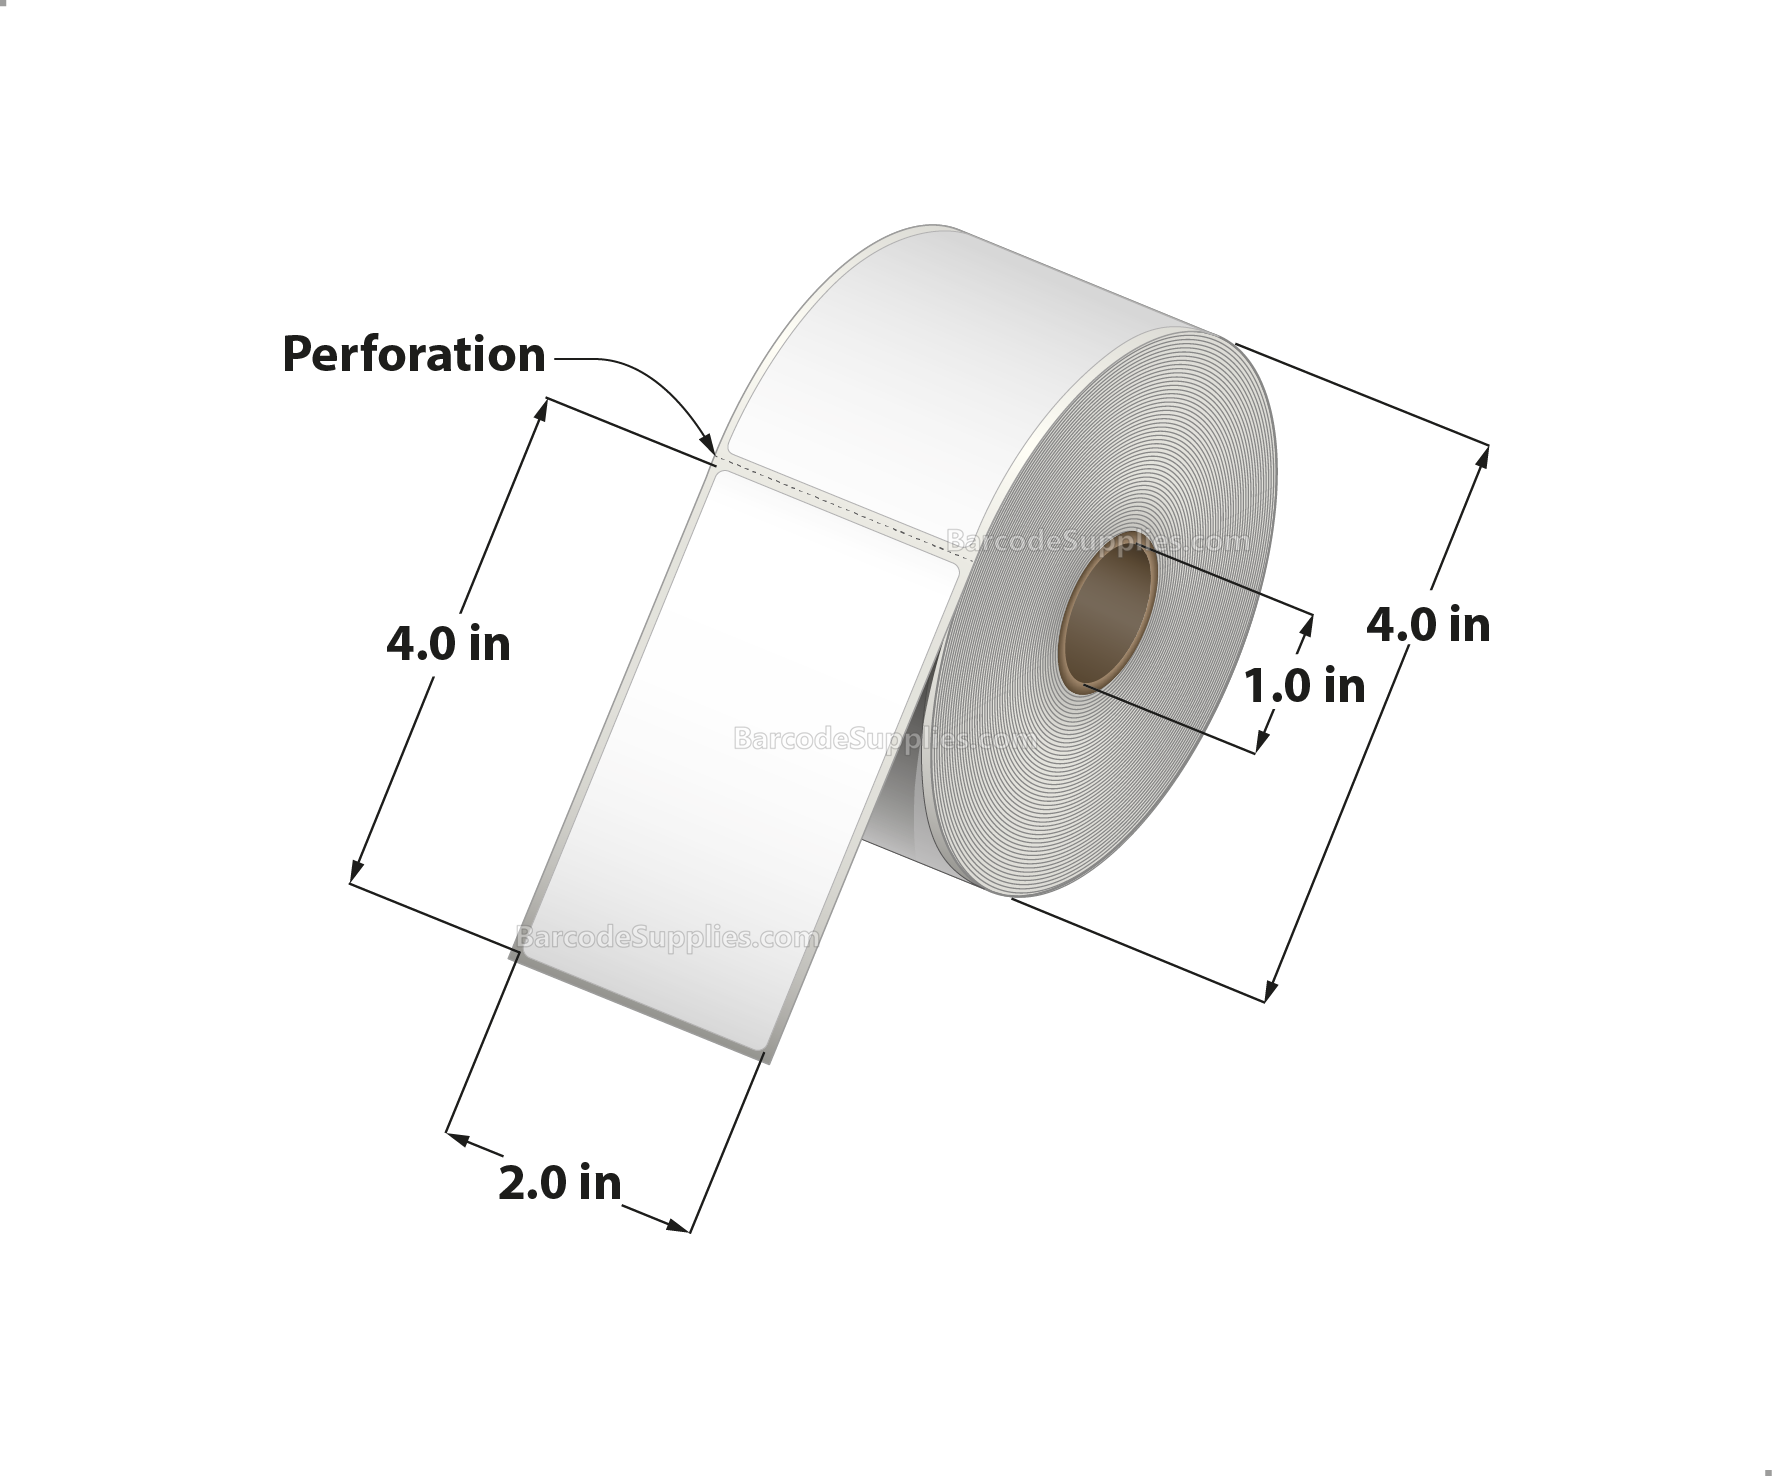 2 x 4 Direct Thermal White Labels With Acrylic Adhesive - Perforated - 380 Labels Per Roll - Carton Of 12 Rolls - 4560 Labels Total - MPN: RD-2-4-380-1